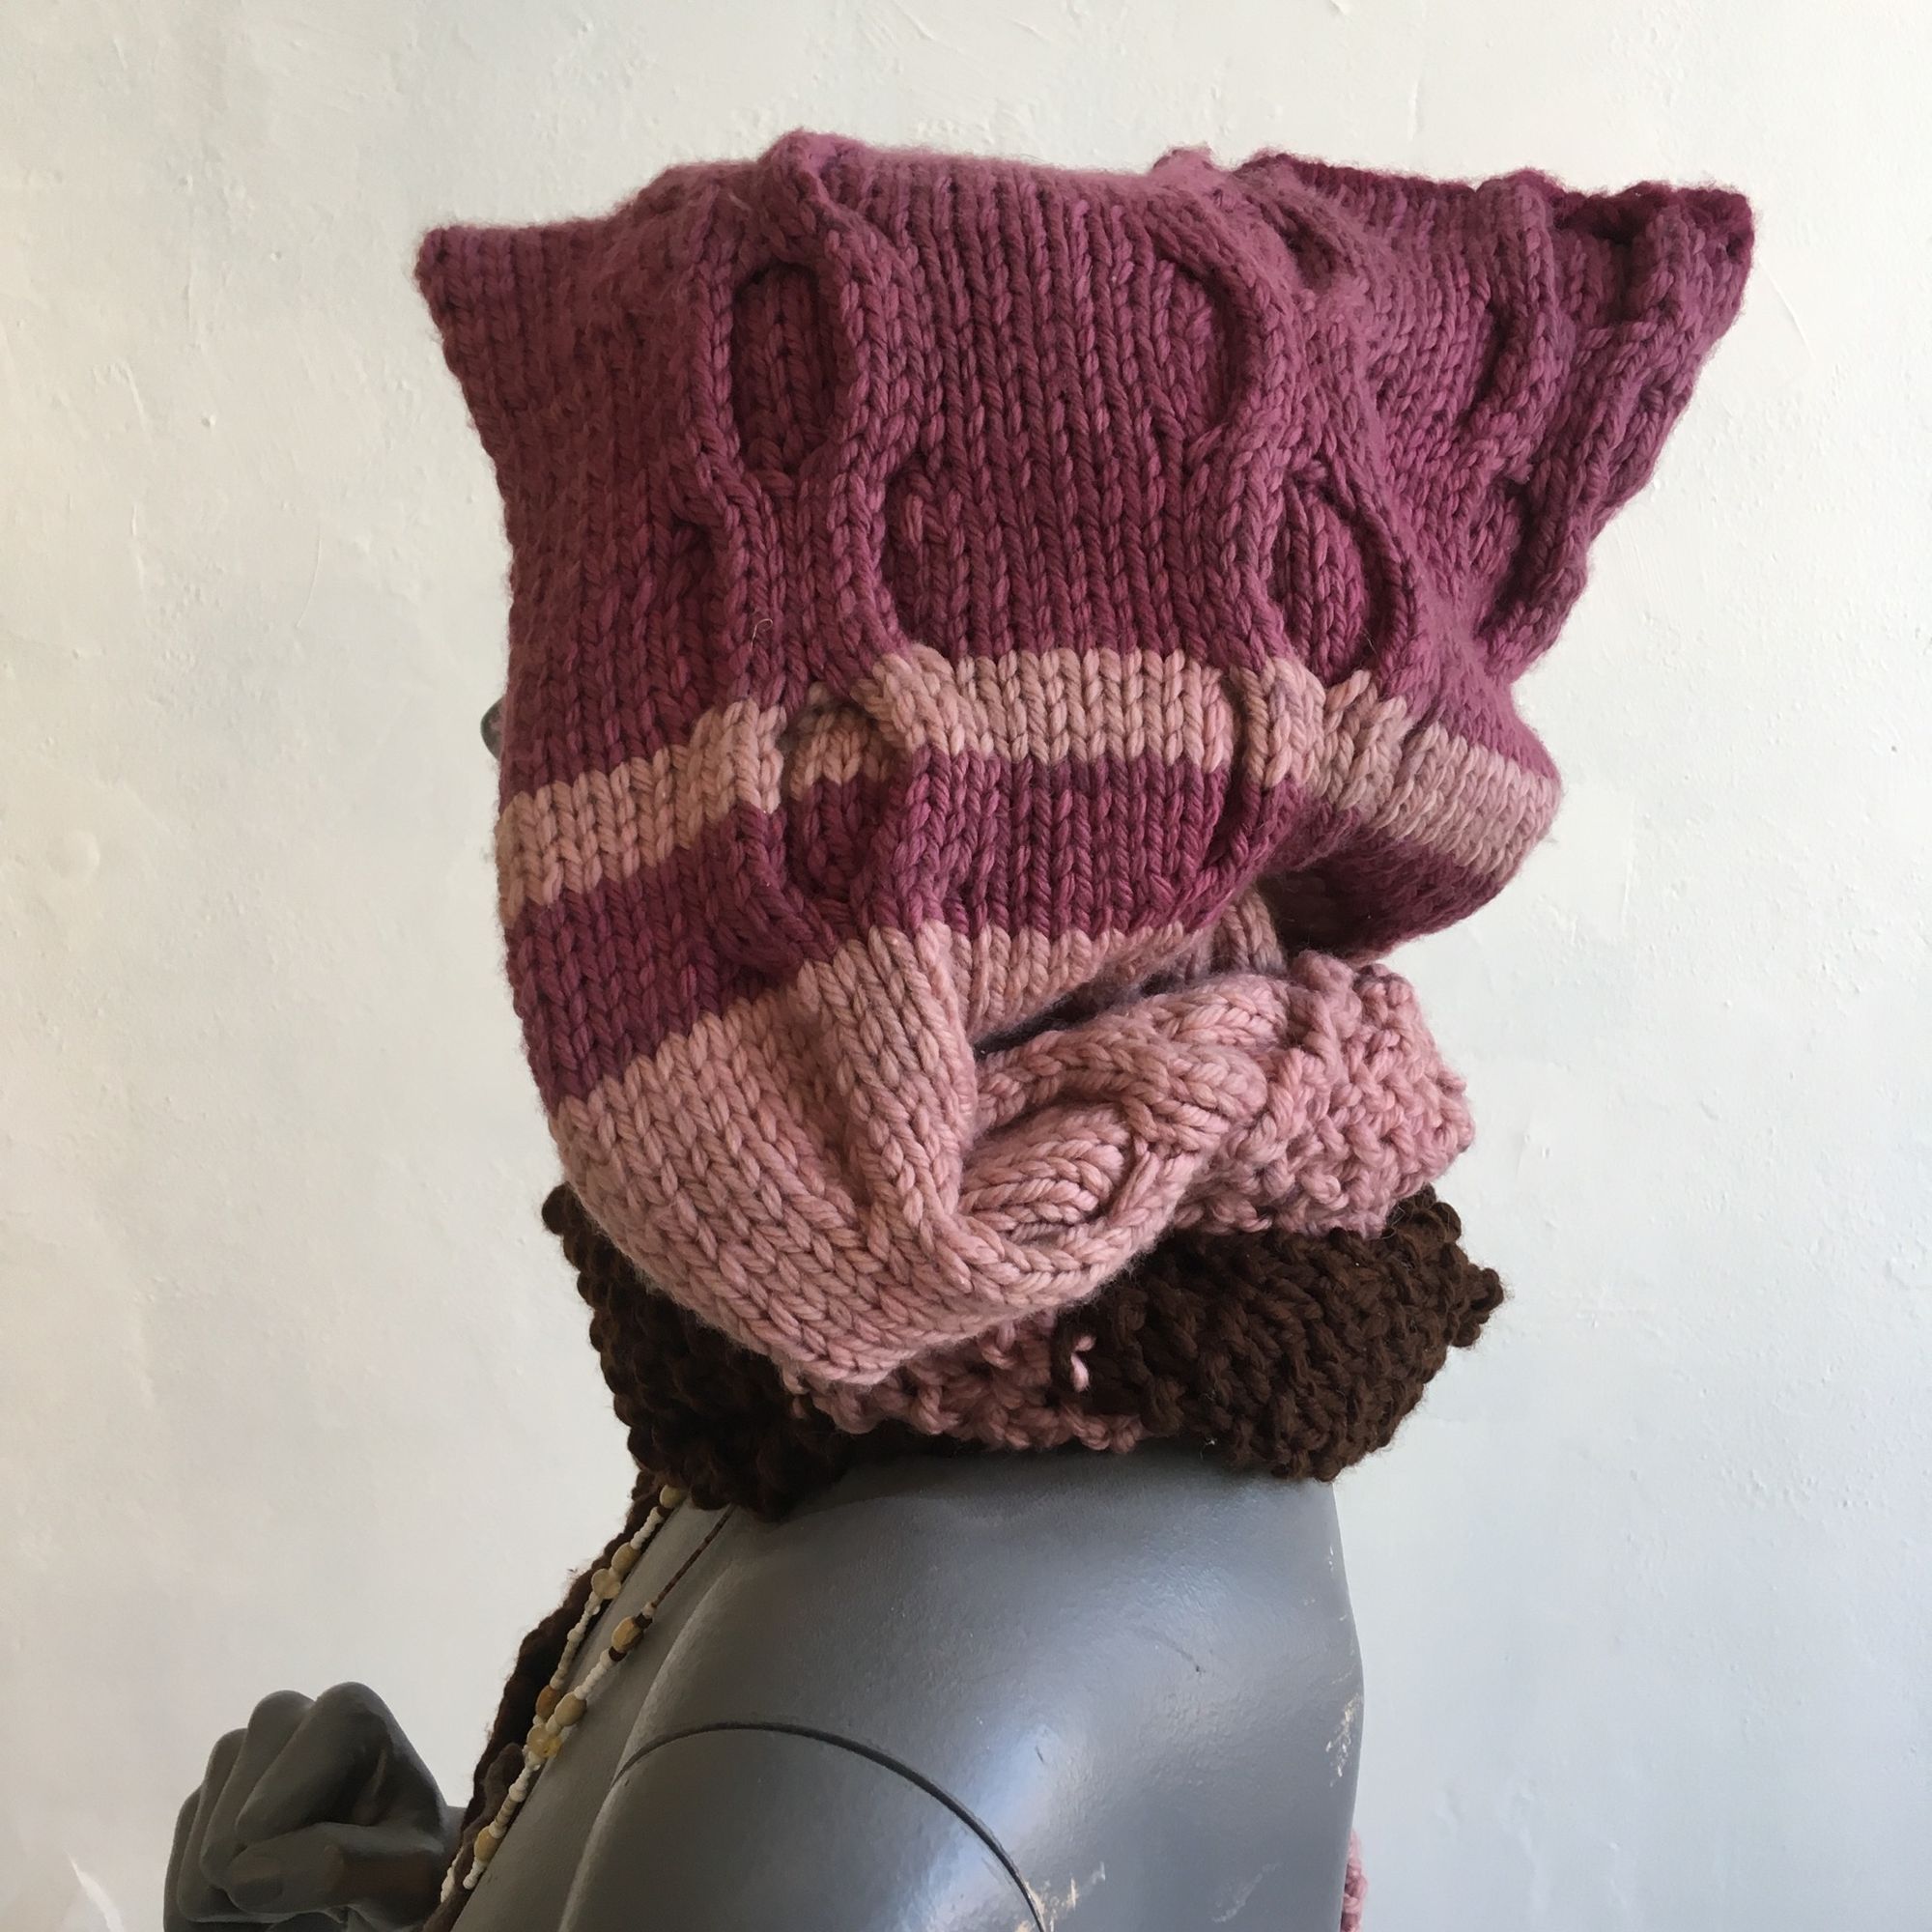 pink and brown cable knit hood-scarf on a grey mannequin against a white wall